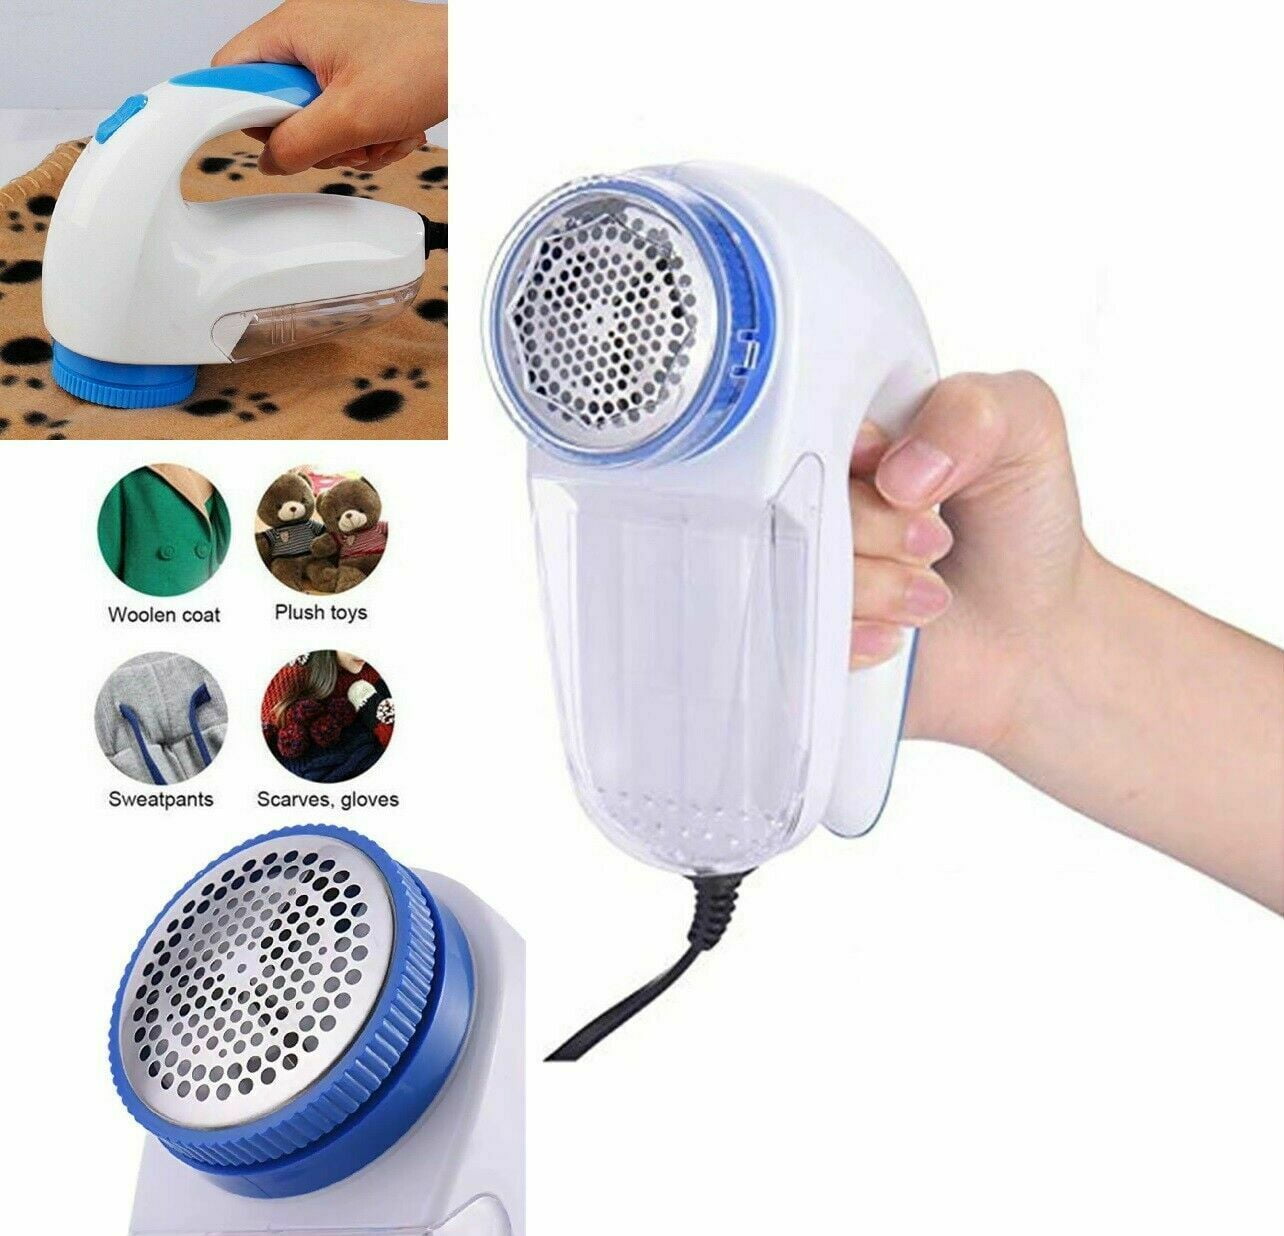  Portable Lint Remover, Handheld Reusable Double Sided Clothes  Fuzz Off Shaver Tool,Sweater Clean Brush, Clothes Fuzz Pill Lint Remover  for Clothes, Pet Hair Fuzz Remover : Health & Household